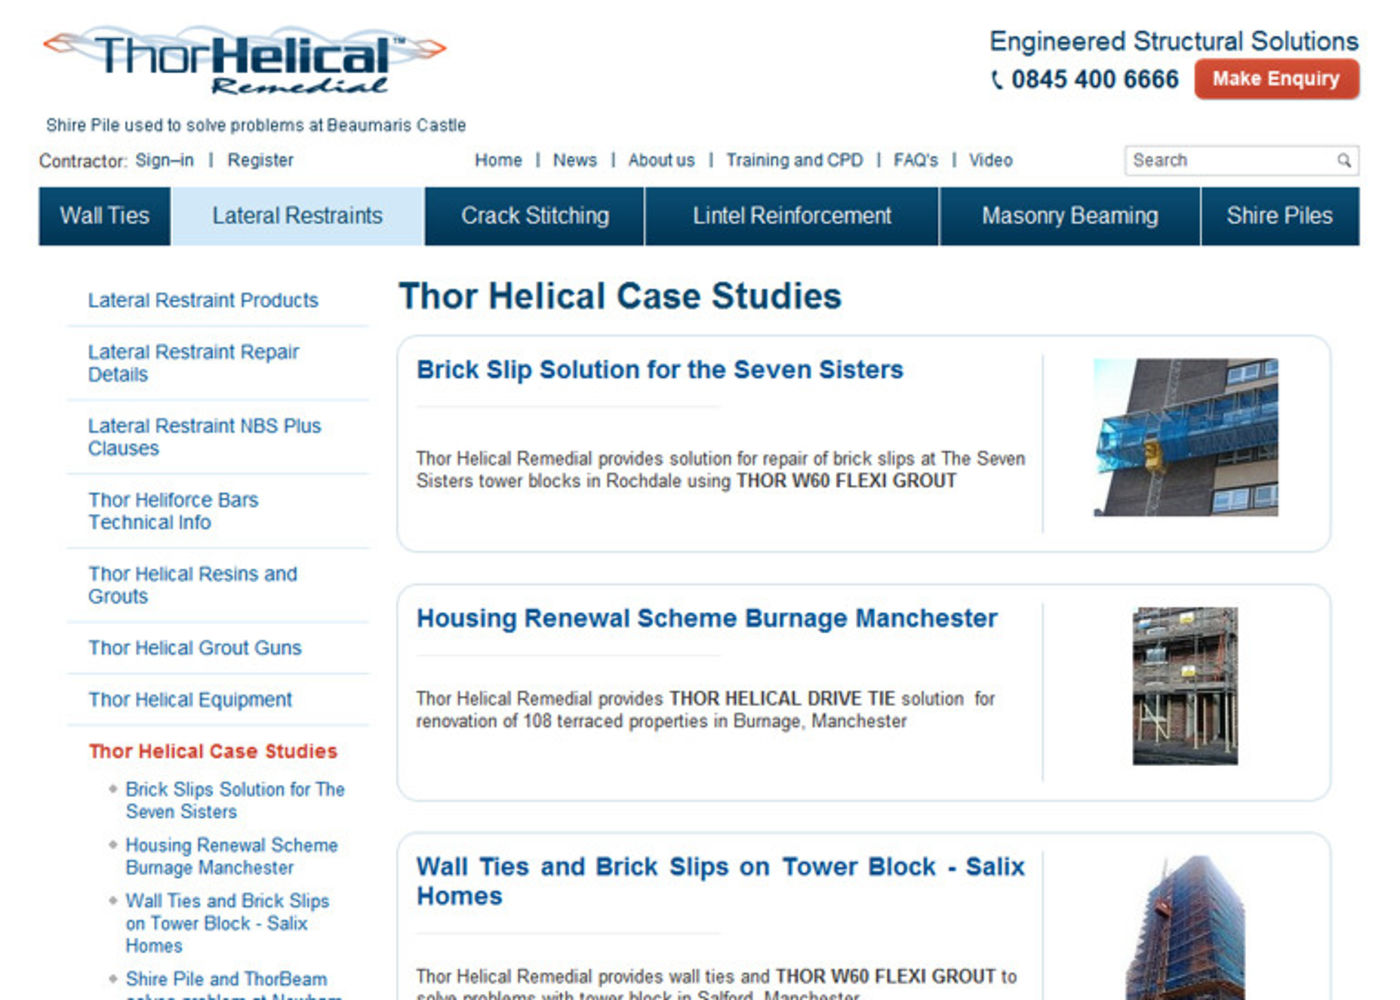 Thor Helical Remedial Case Studies 